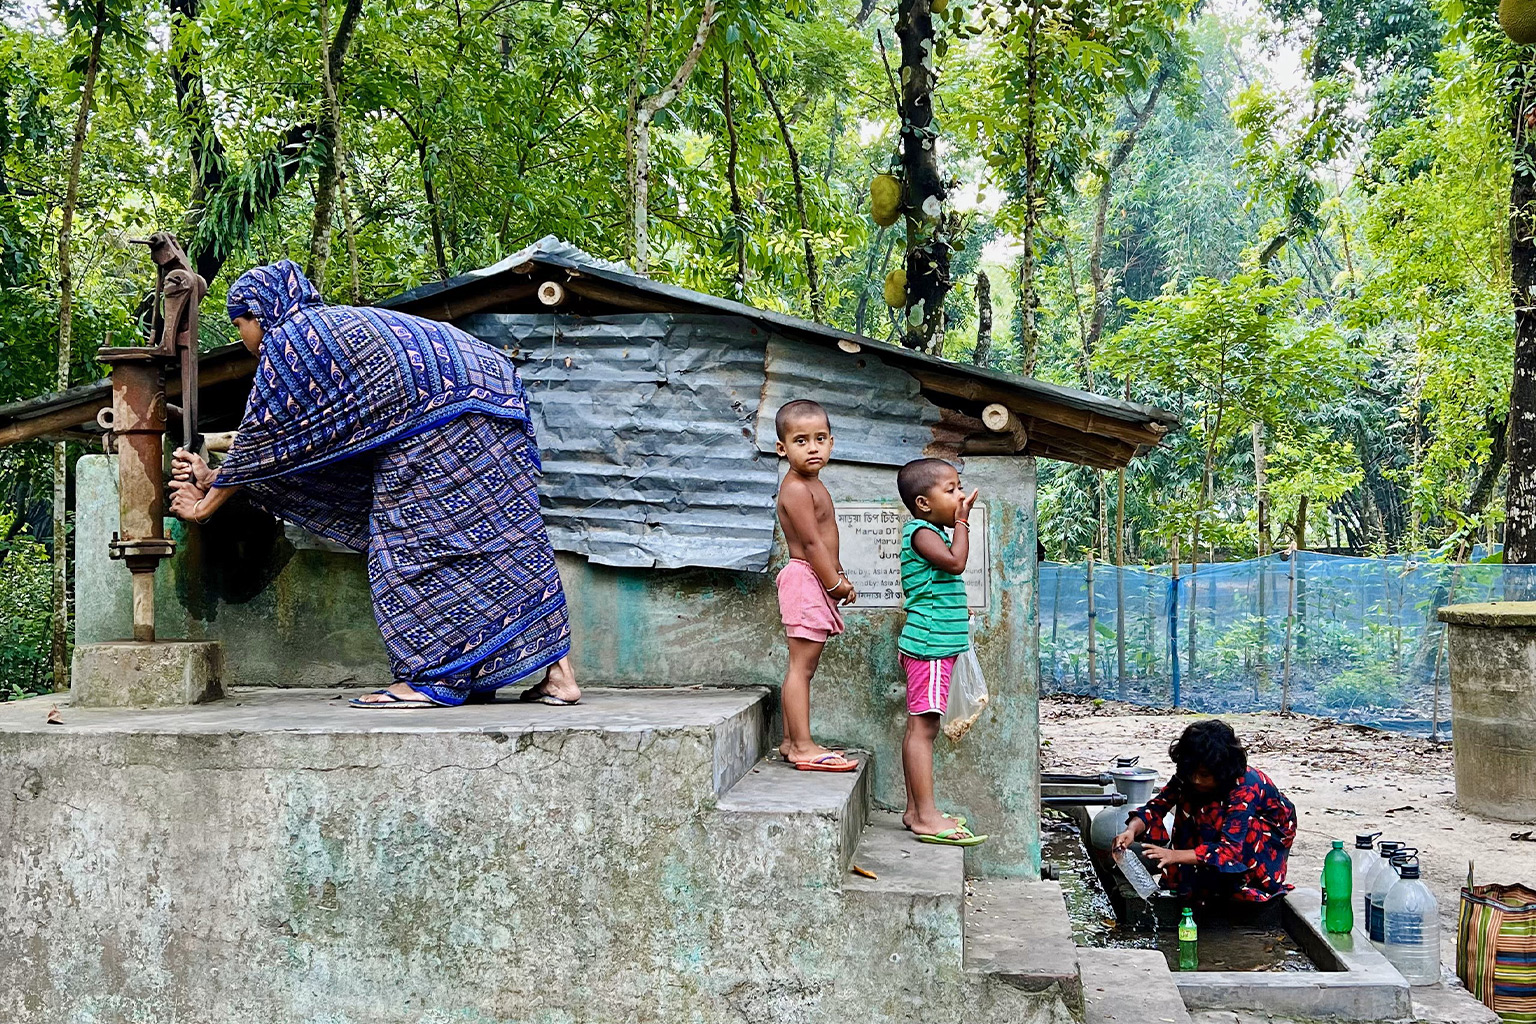 A family collecting water.